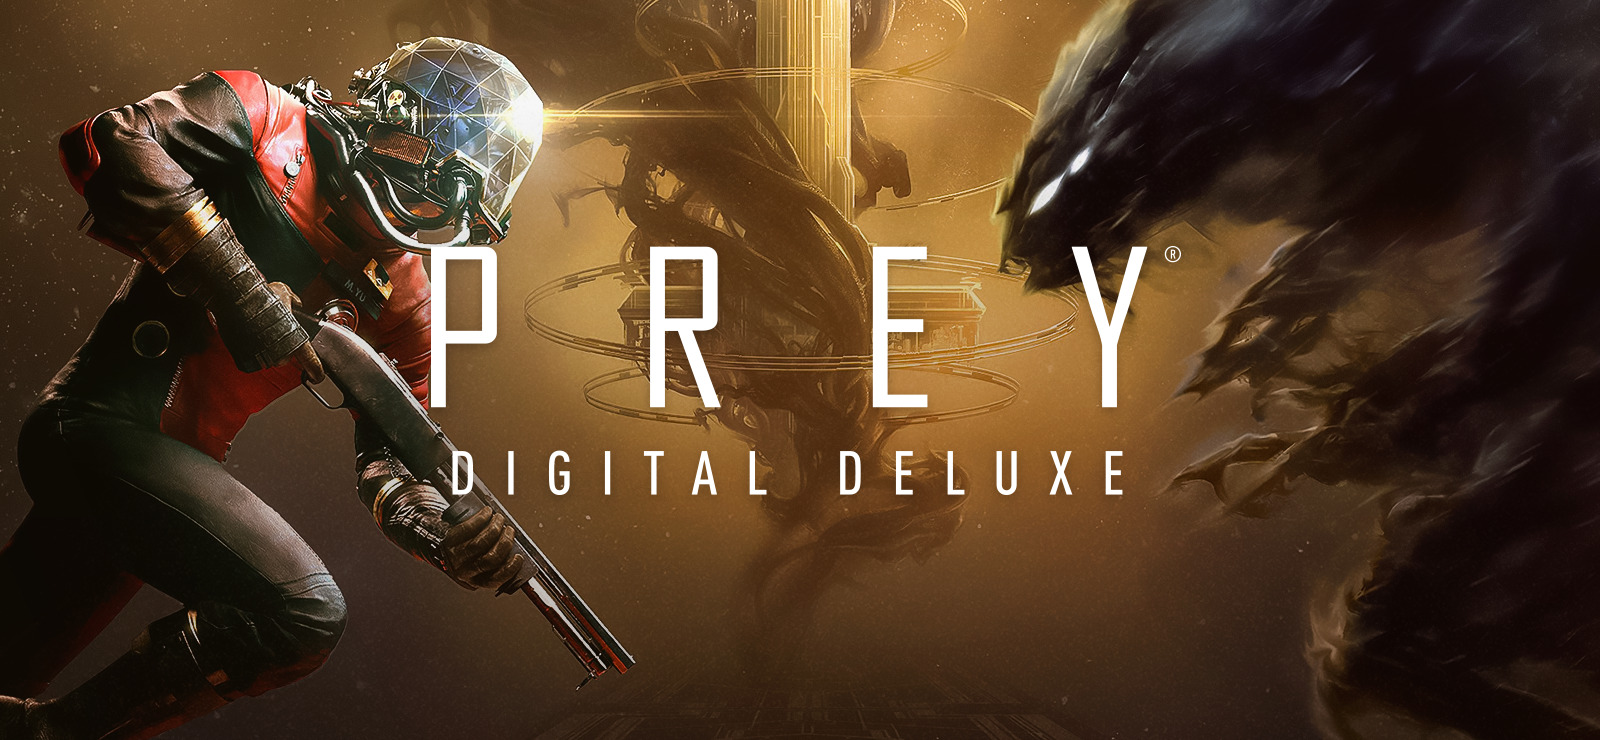 Prey Digital Deluxe Edition PC Game Free Download